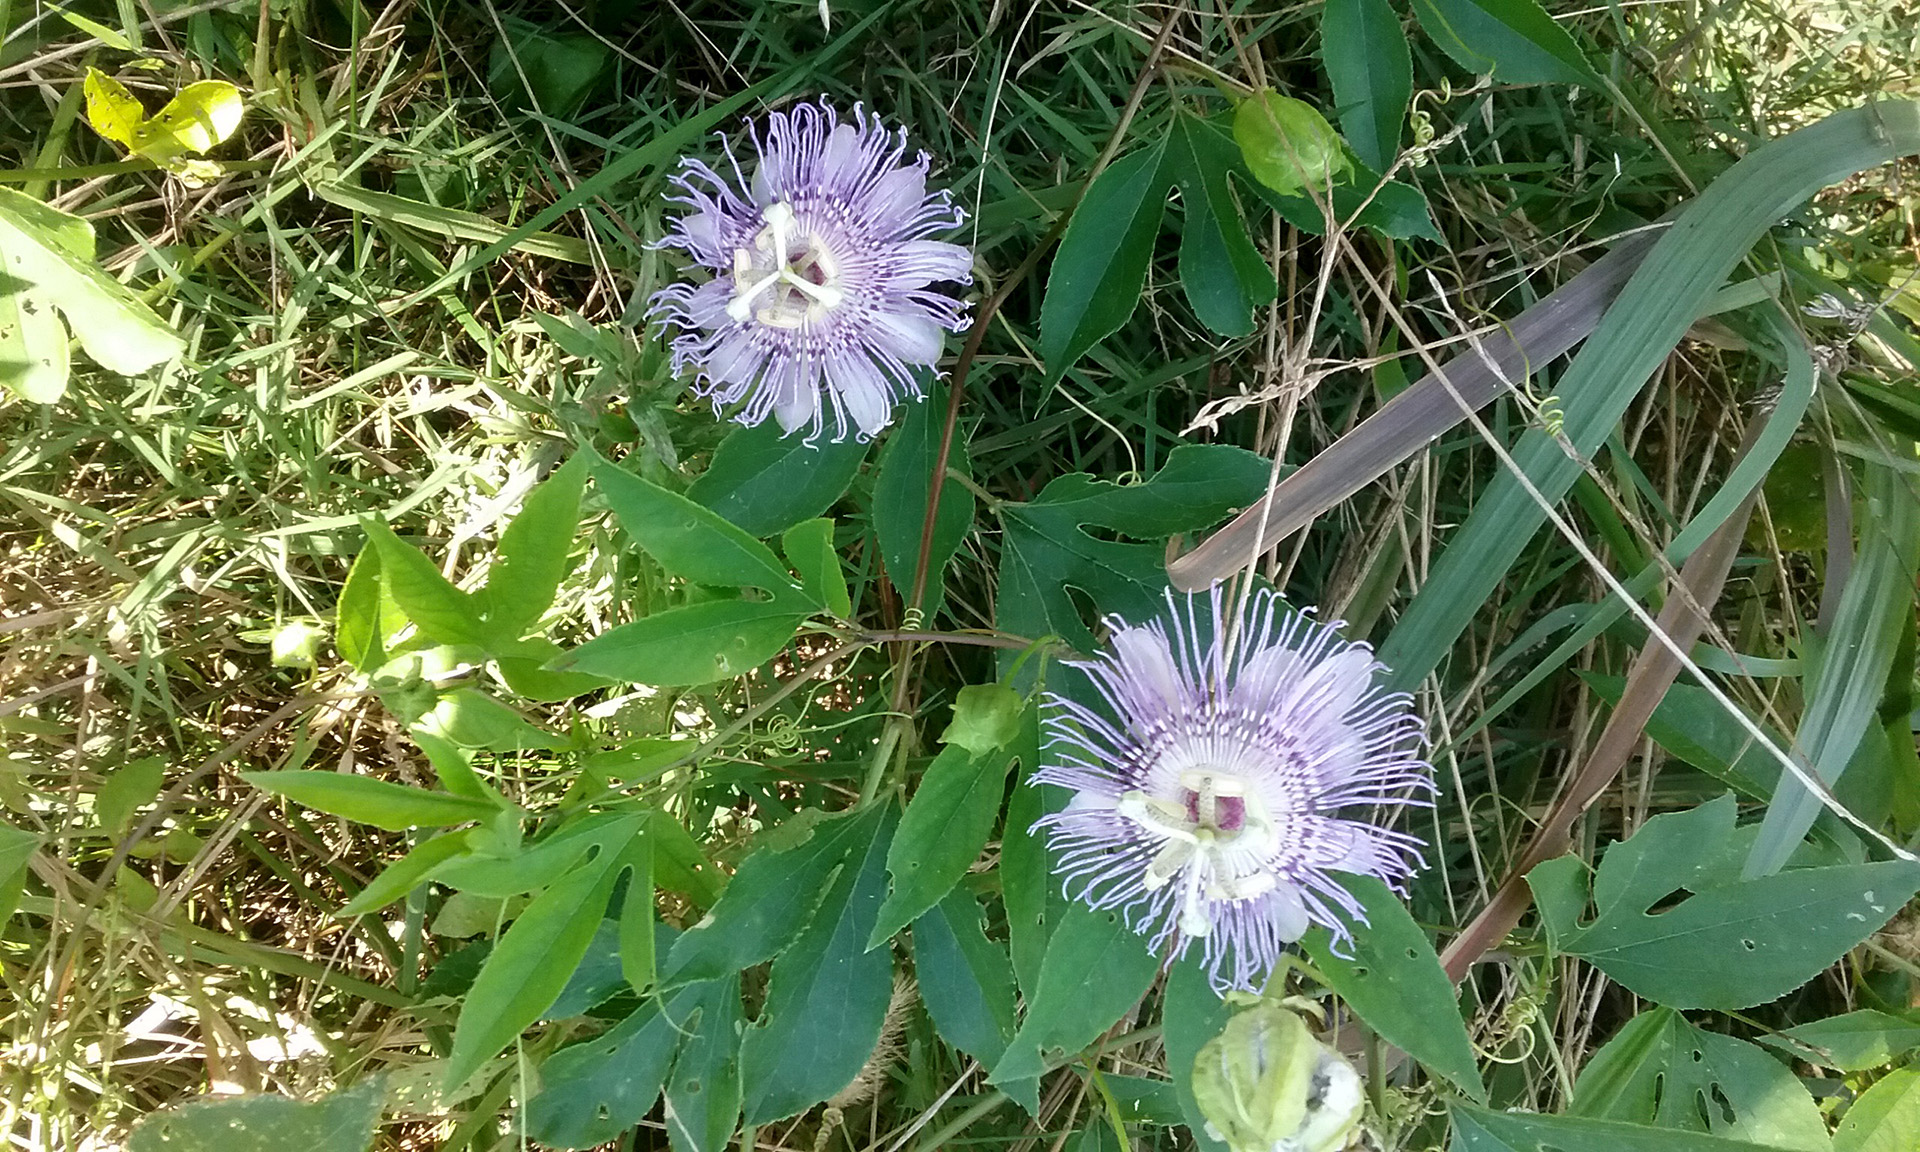 Passiflora blooming in an oldfield in Raleigh, NC.